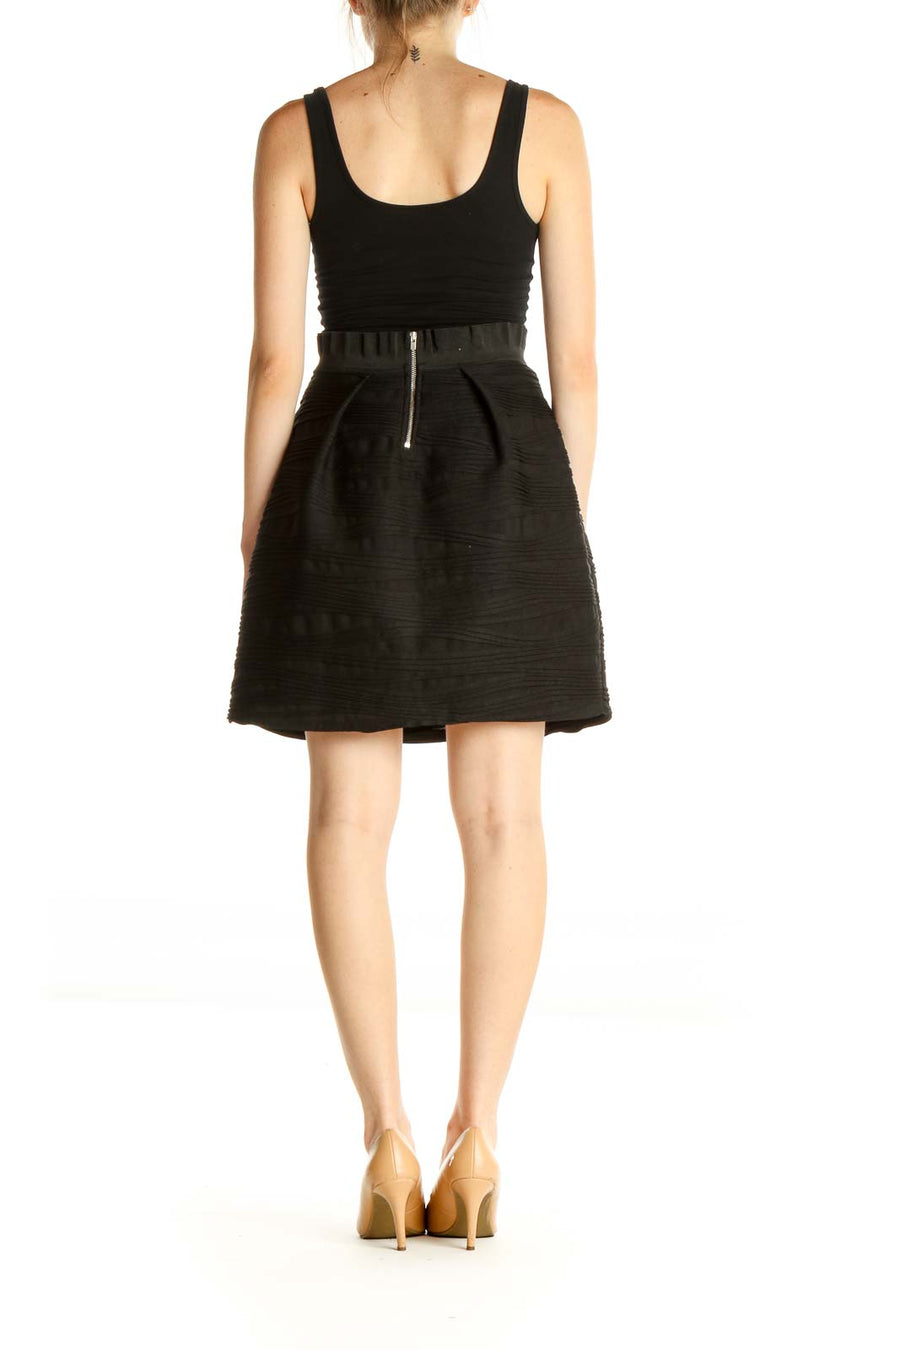 Black Solid Chic Flared Skirt